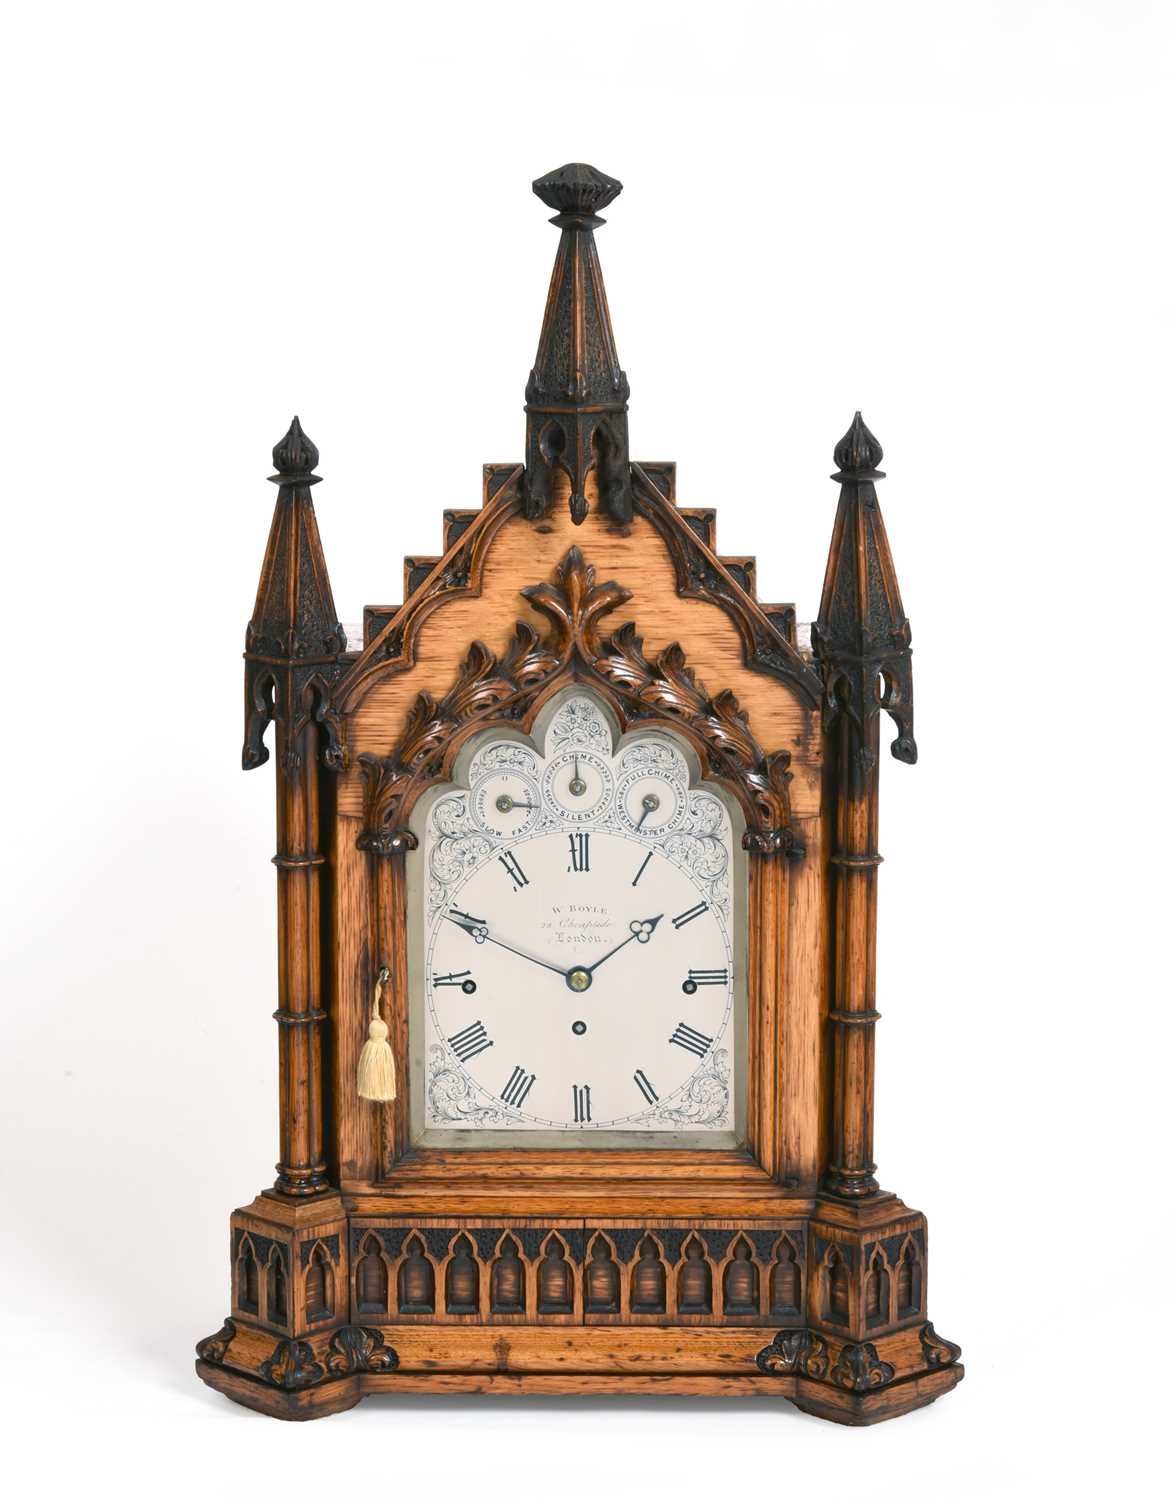 A Victorian Oak Chiming Table Clock, signed W.Boyle, 28 Cheapside, London, circa 1860, Gothic